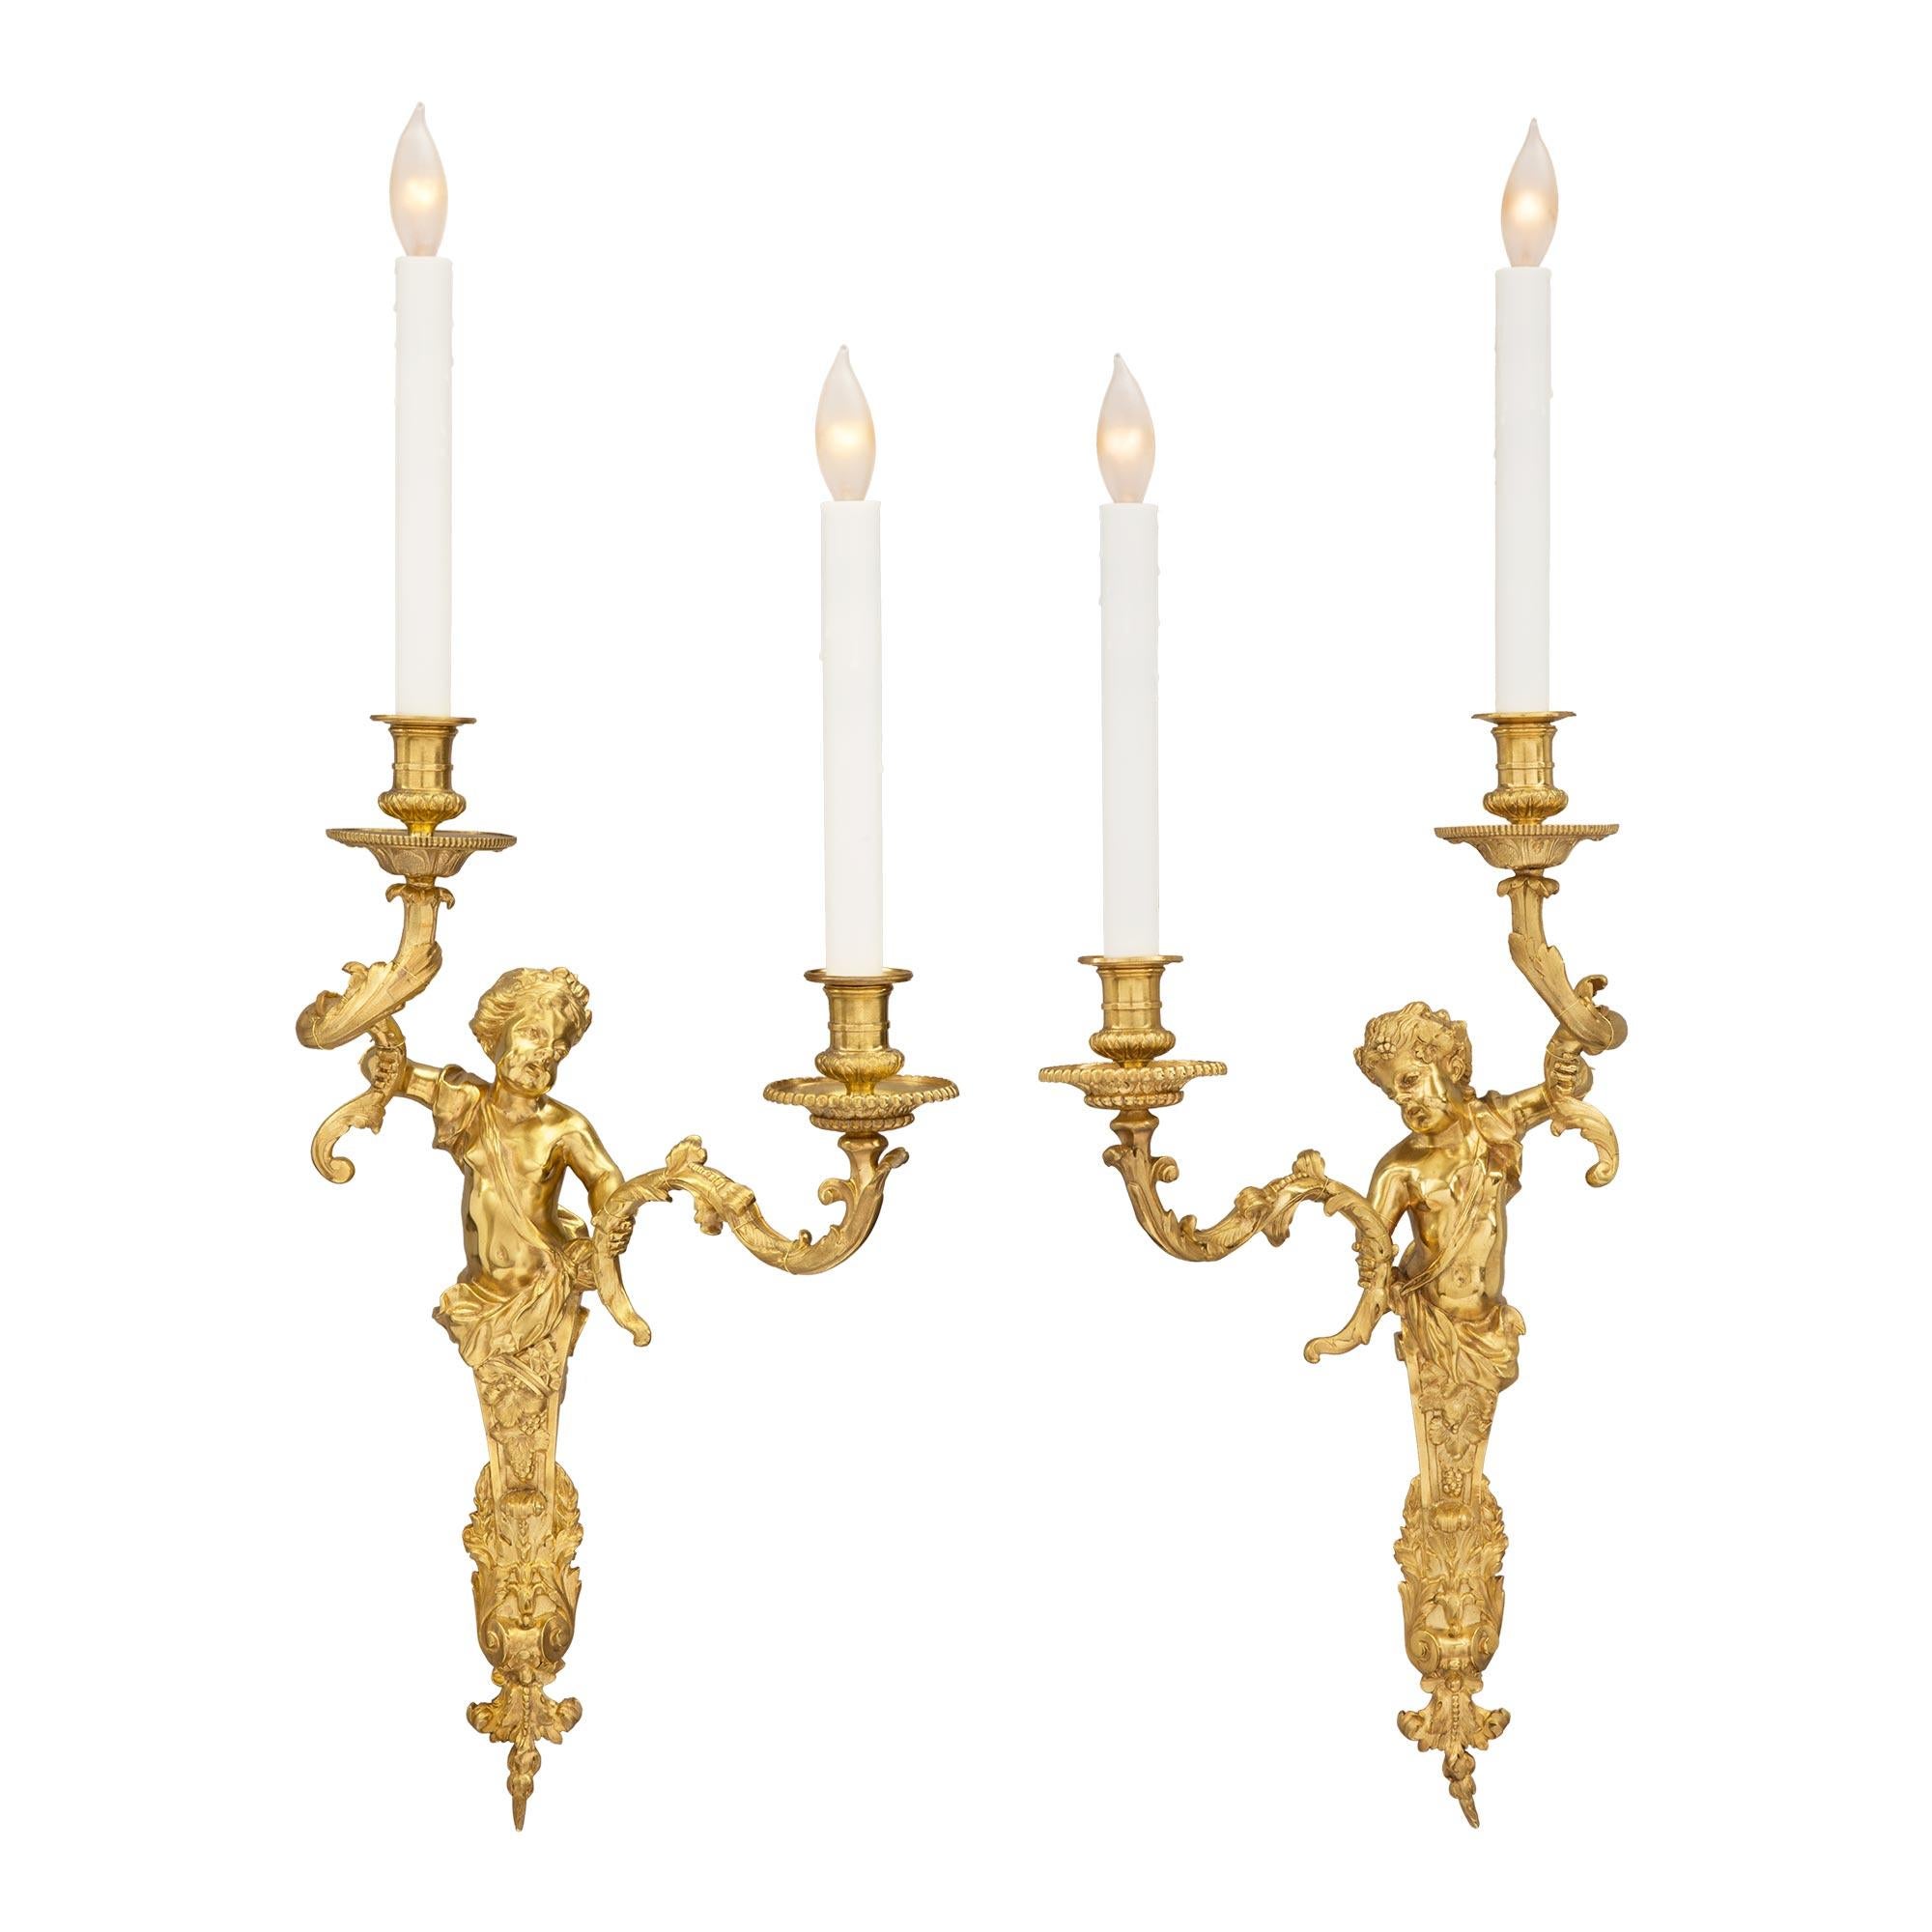 A beautiful and high quality true pair of French 19th century Louis XVI st. ormolu two arm sconces of Bacchus and Ariadne, after a model by Gilles-Marie Oppenordt and attributed to Henry Dasson. Each sconce is centered by a lovely foliate bottom